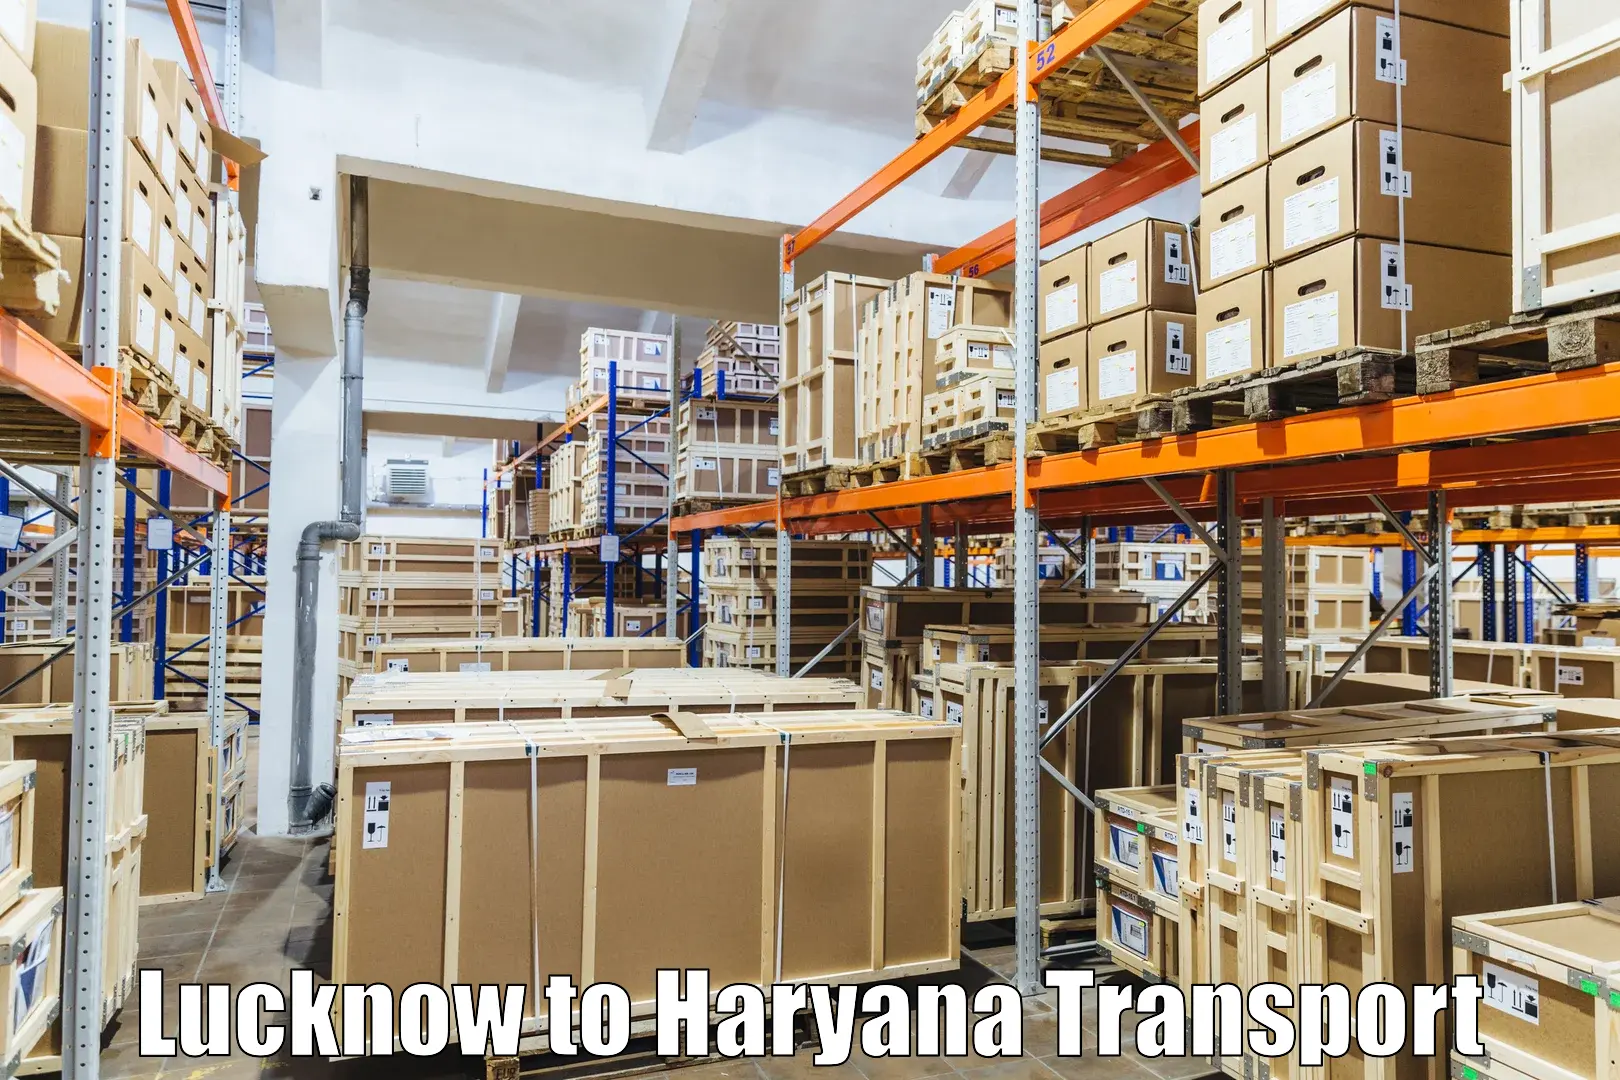 Shipping partner Lucknow to NCR Haryana